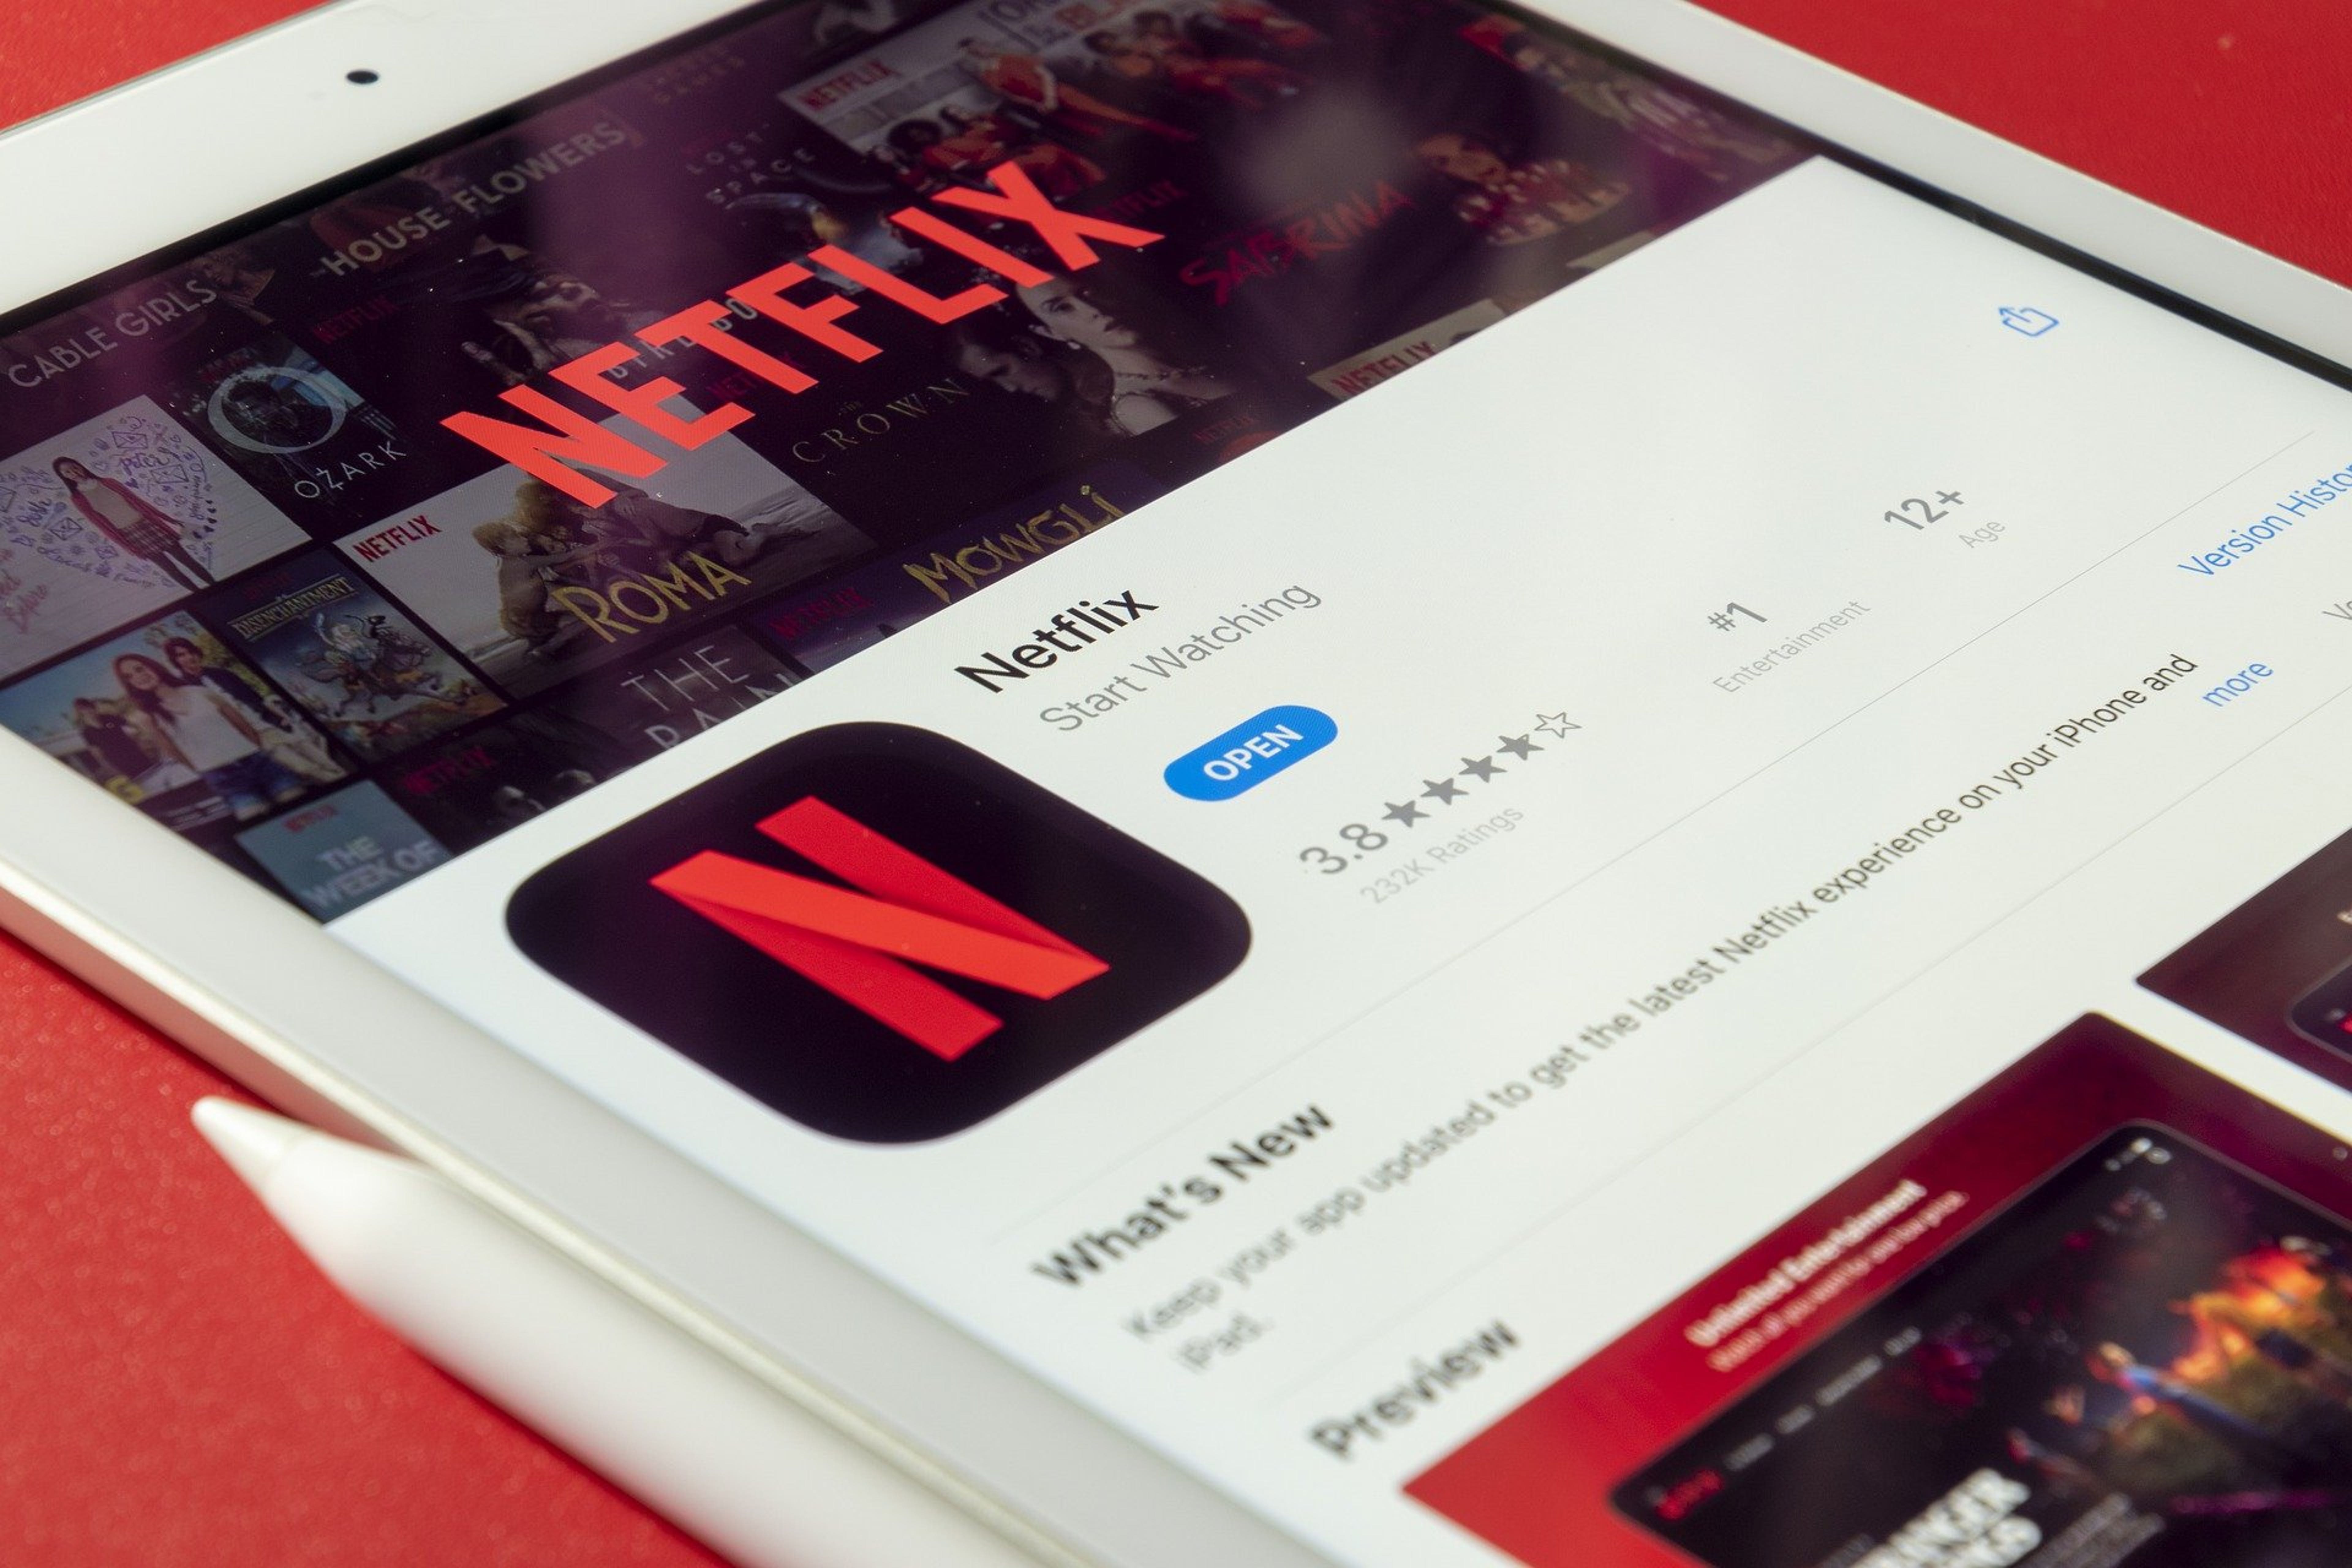 Ad-Supported Netflix Plans Could Come By End Of 2022: What Investors Need To Know